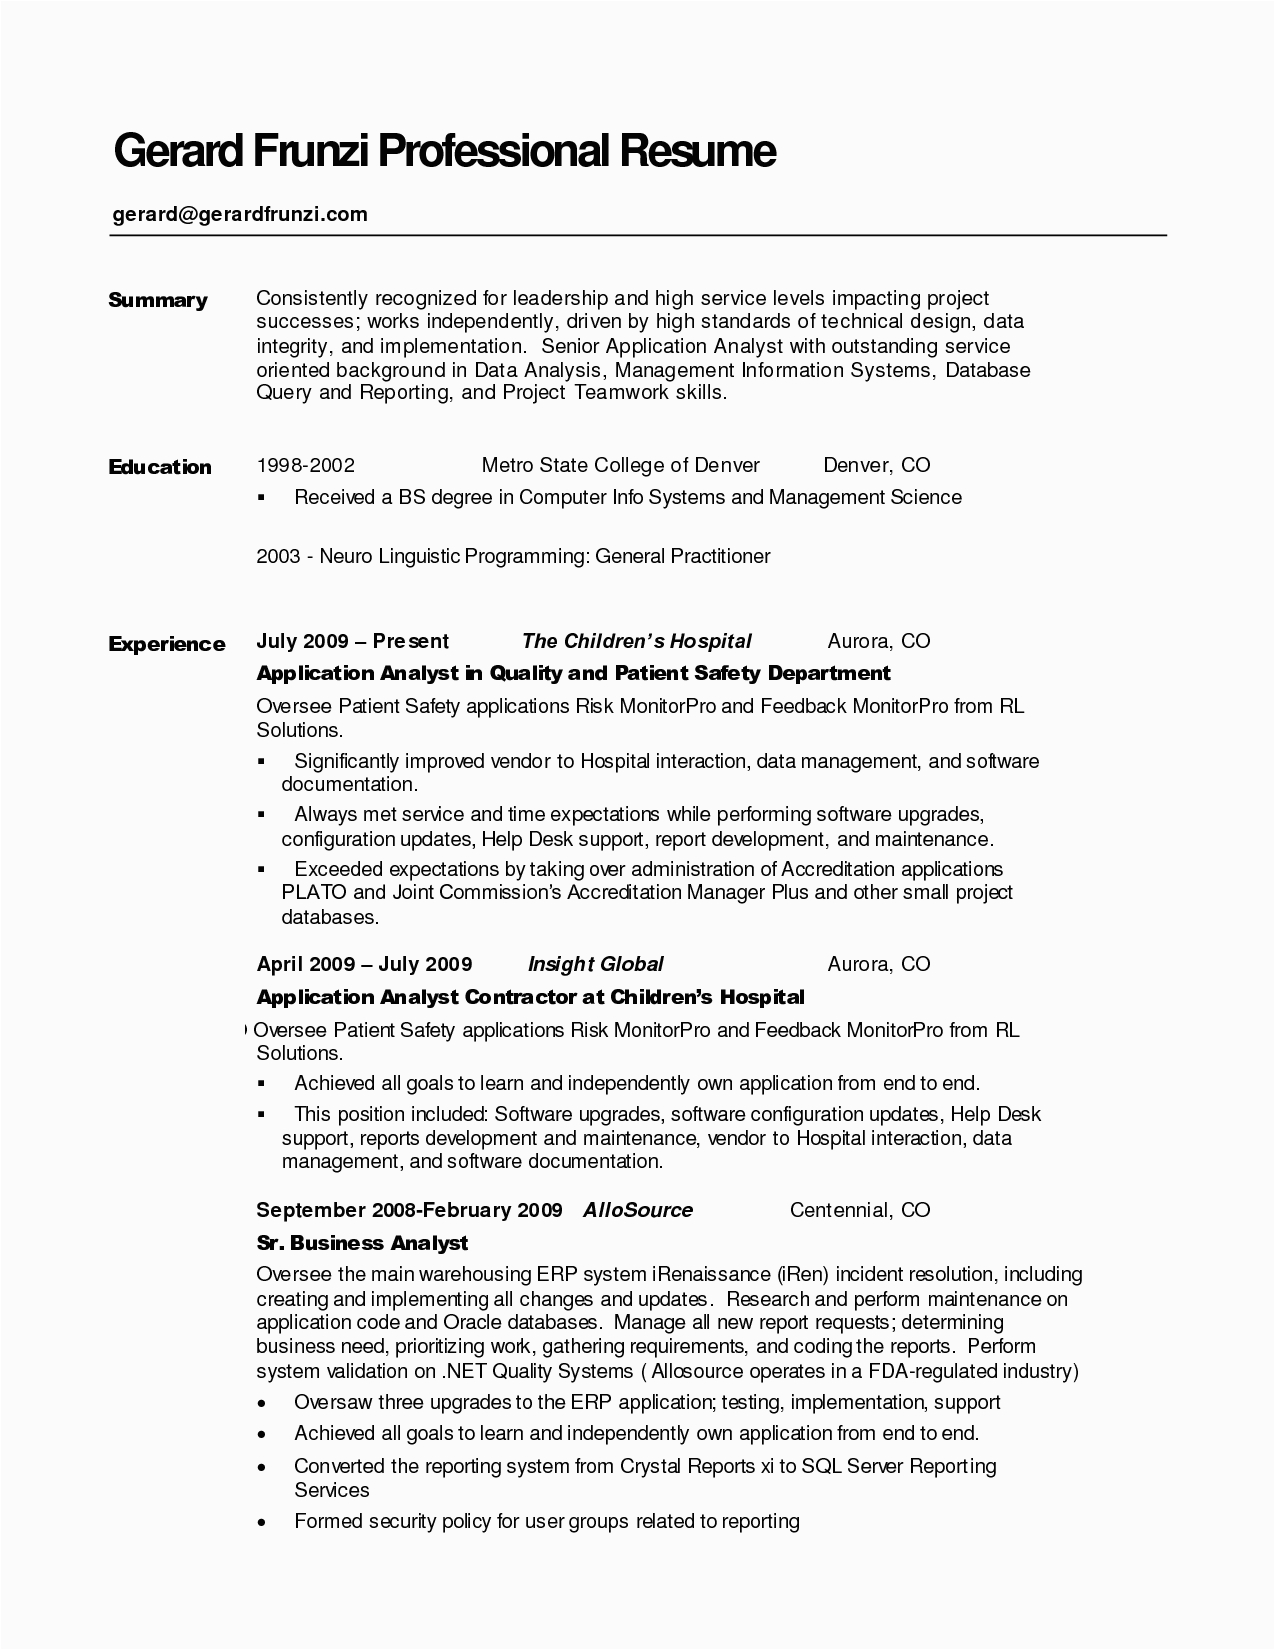 Resume Summary Samples for It Professionals It Professional Resume Summary Best Resume Examples